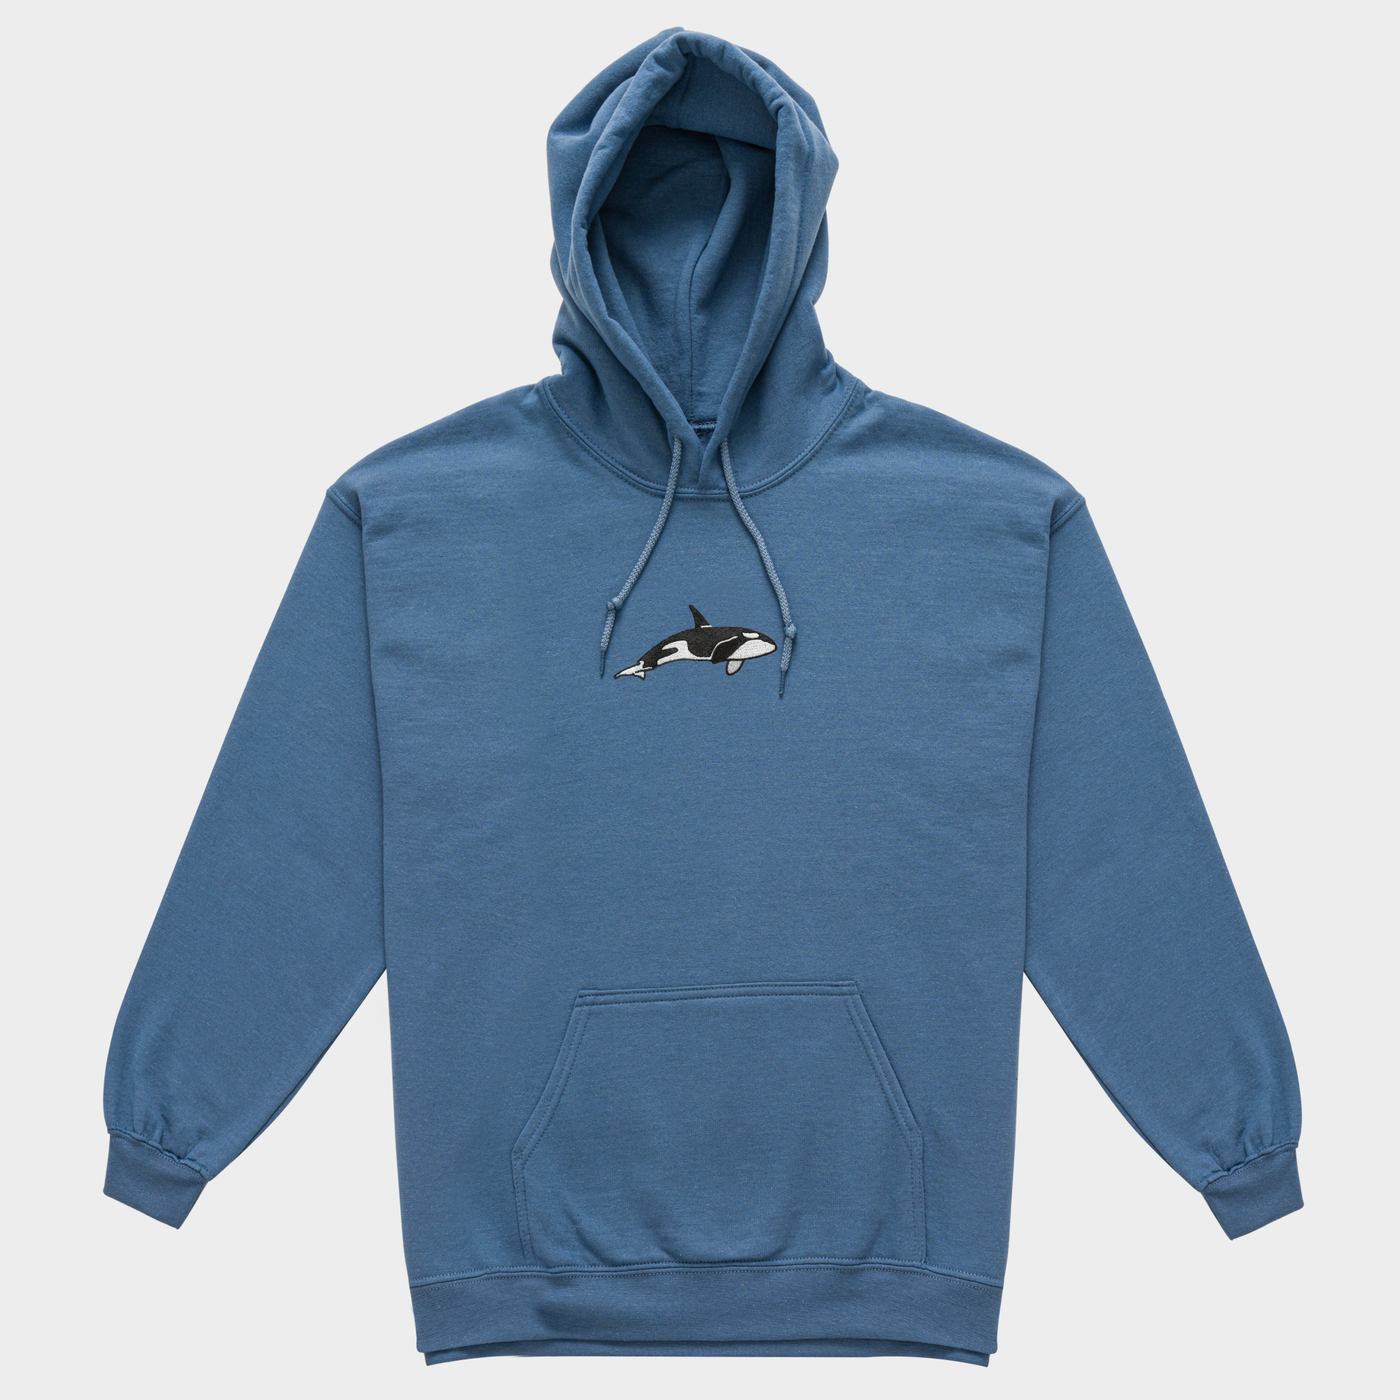 Bobby's Planet Men's Embroidered Orca Hoodie from Seven Seas Fish Animals Collection in Indigo Blue Color#color_indigo-blue